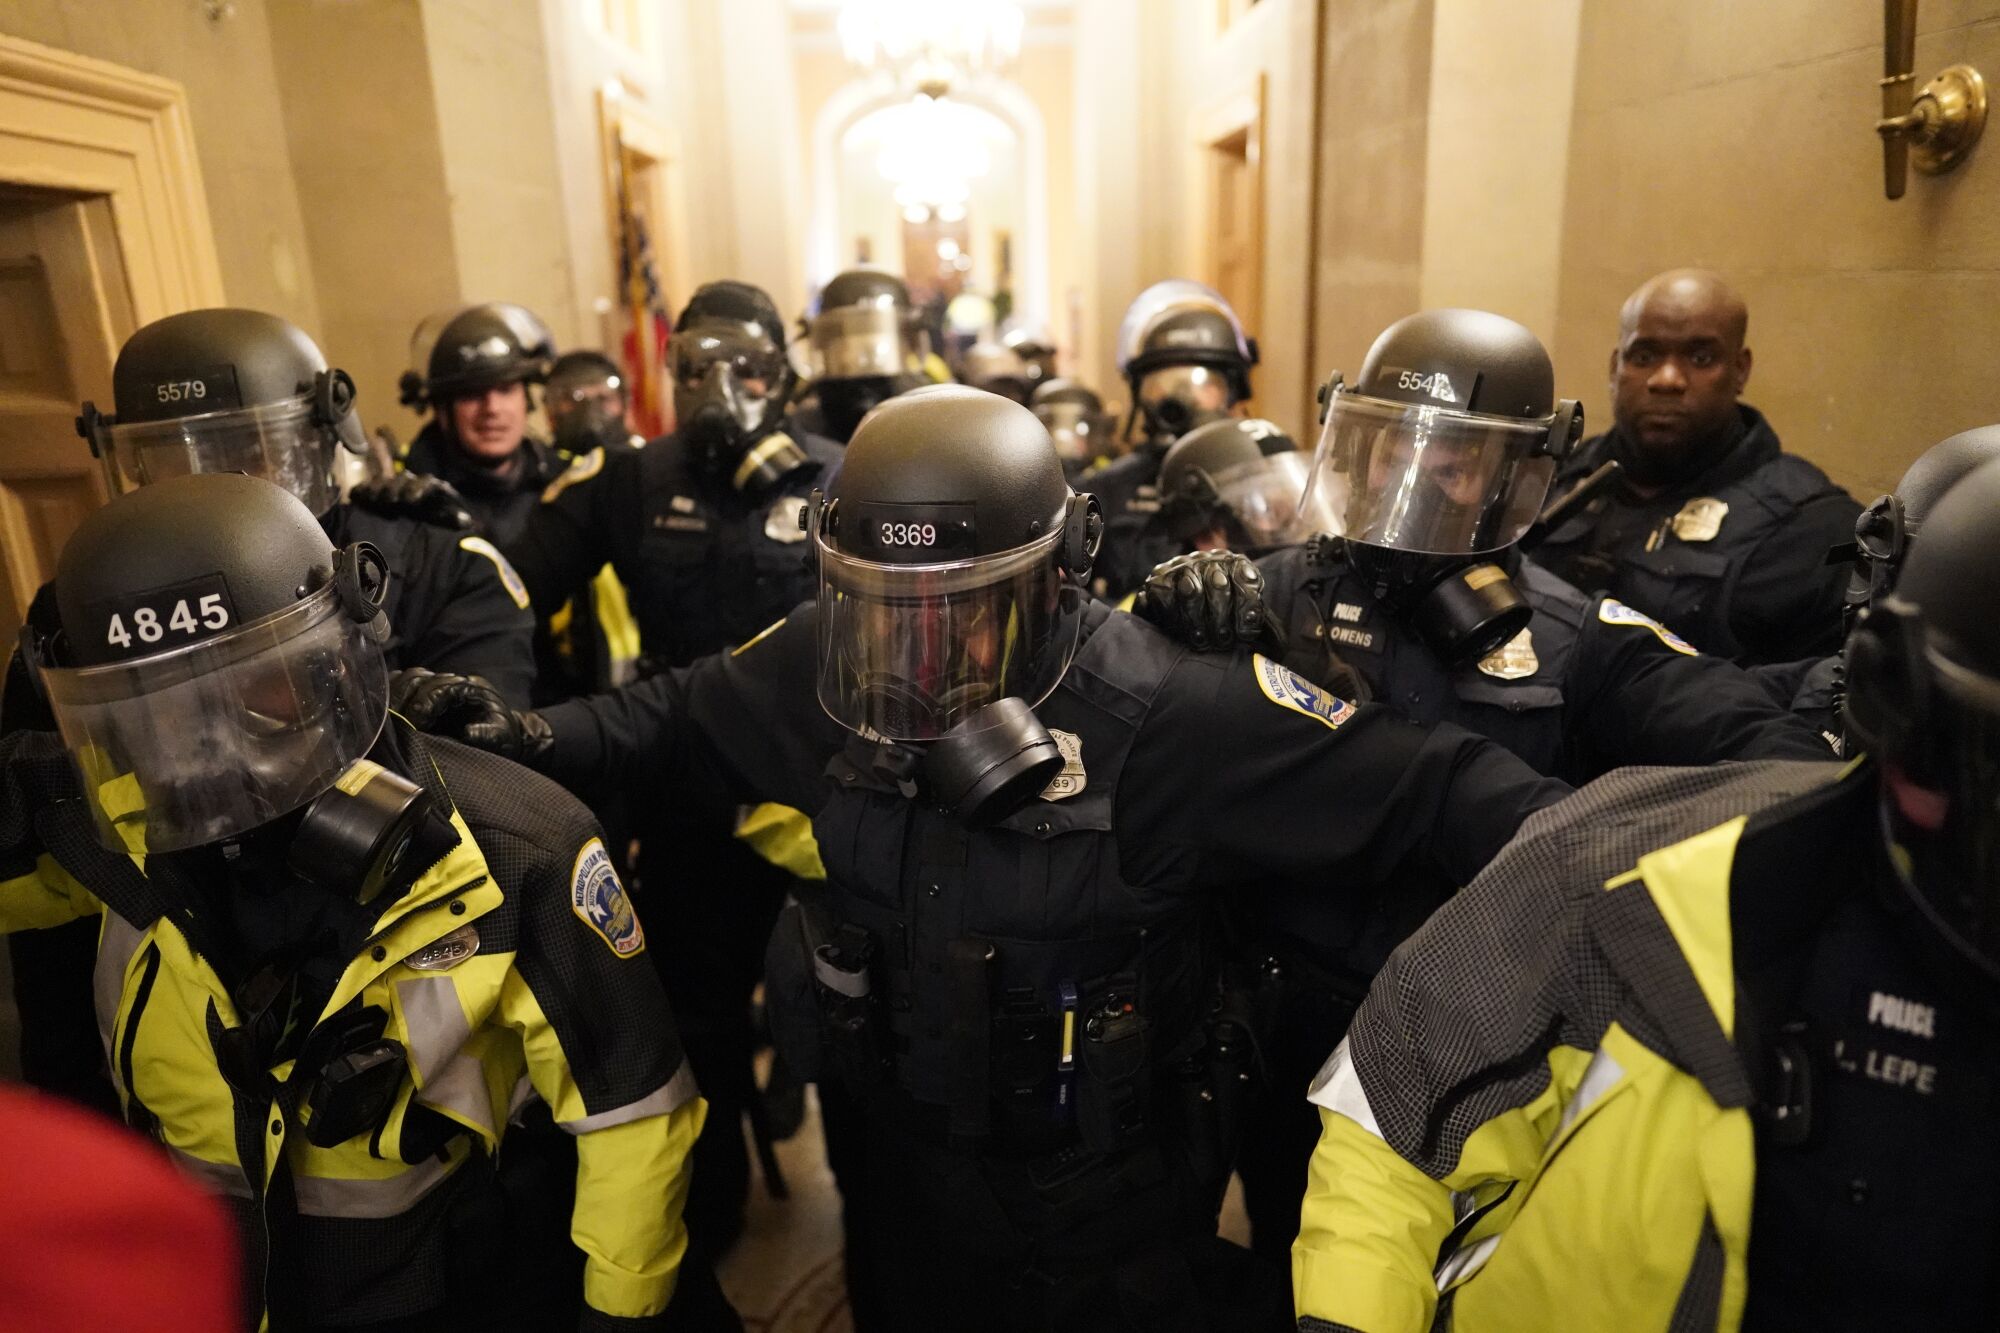 Officers form a line to prevent rioters from going farther into the Capitol during the Jan. 6, 2021, insurrection.